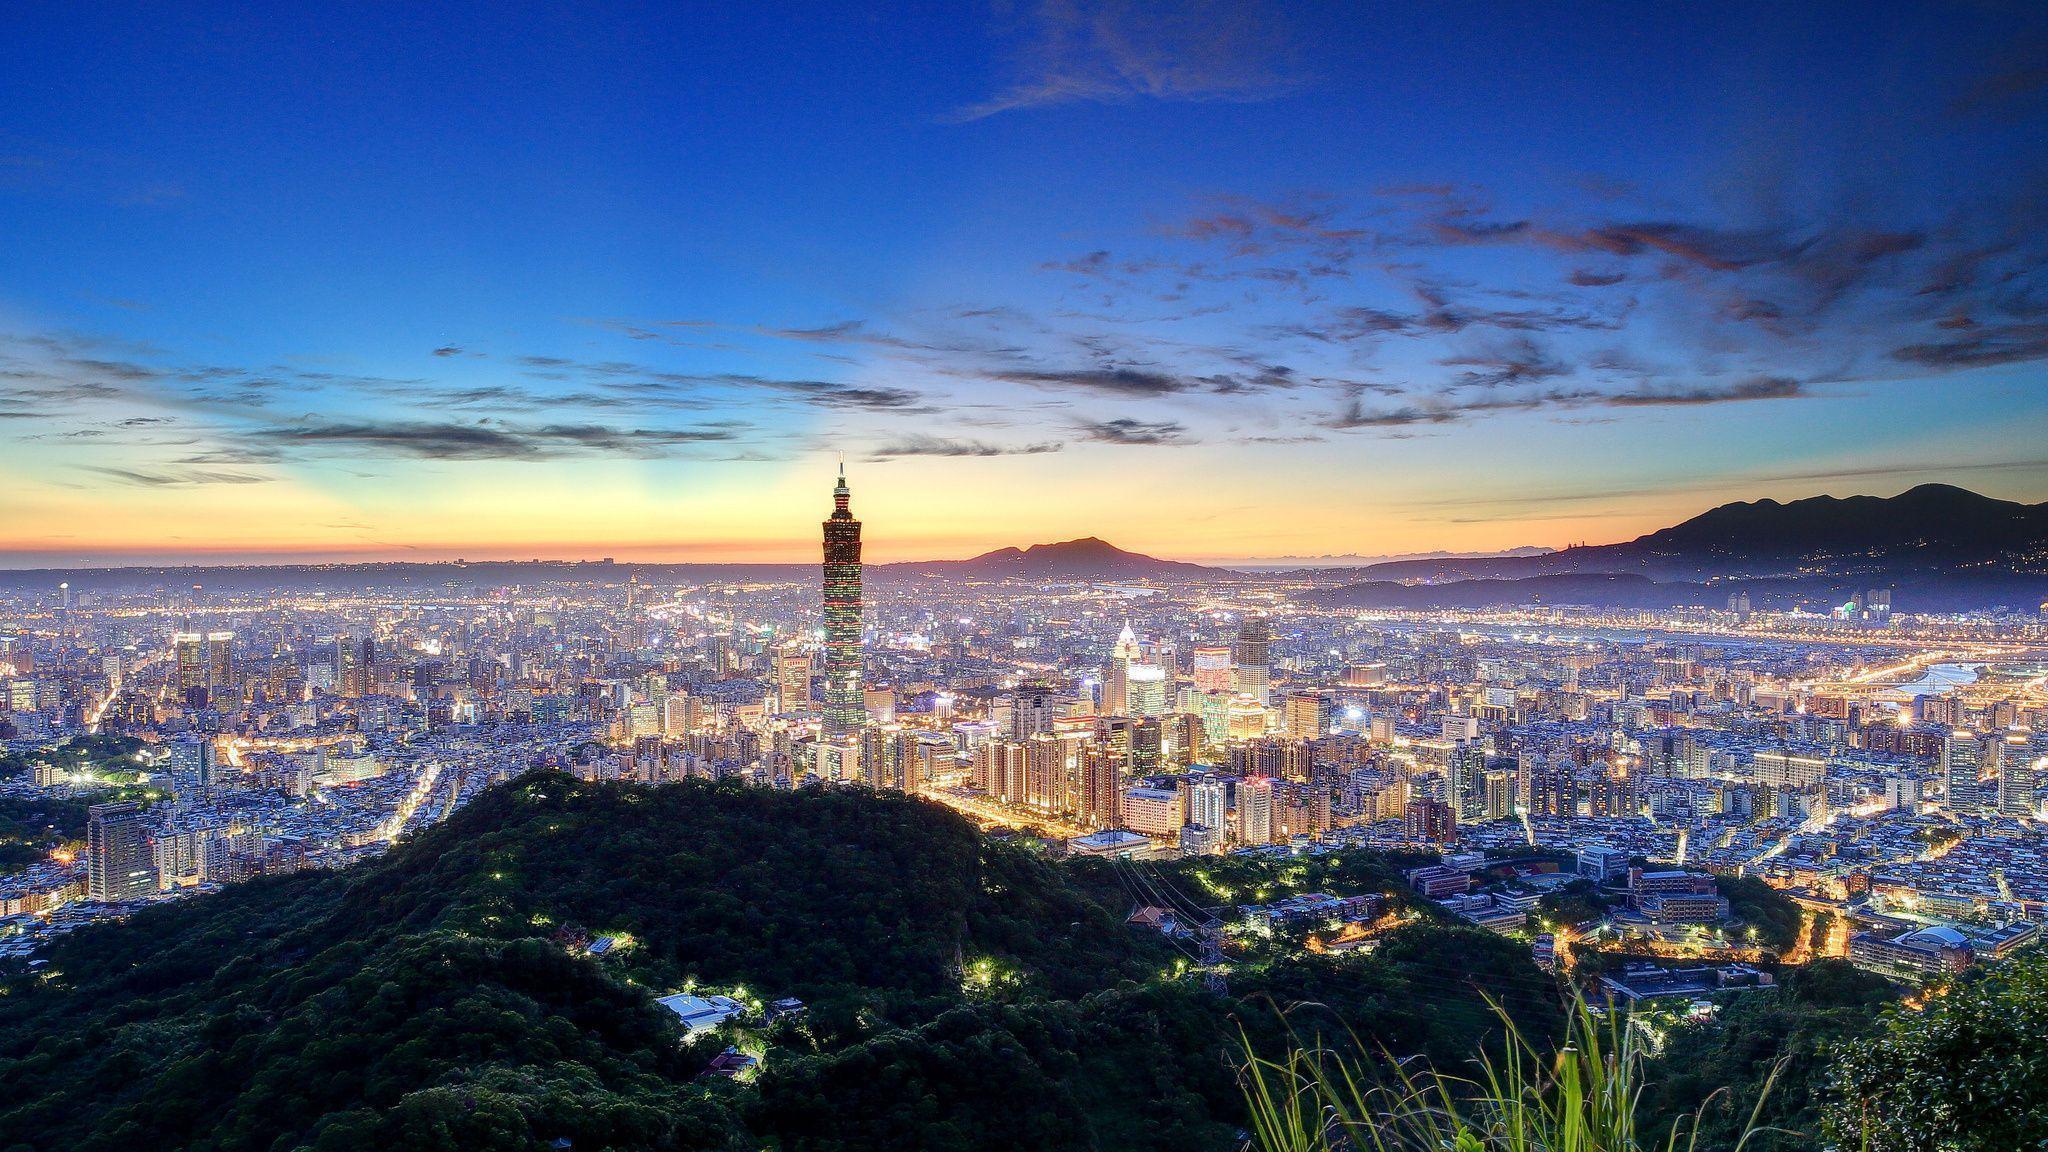 Best Taiwan Wallpapers, Wide 2K Quality Photos Collection